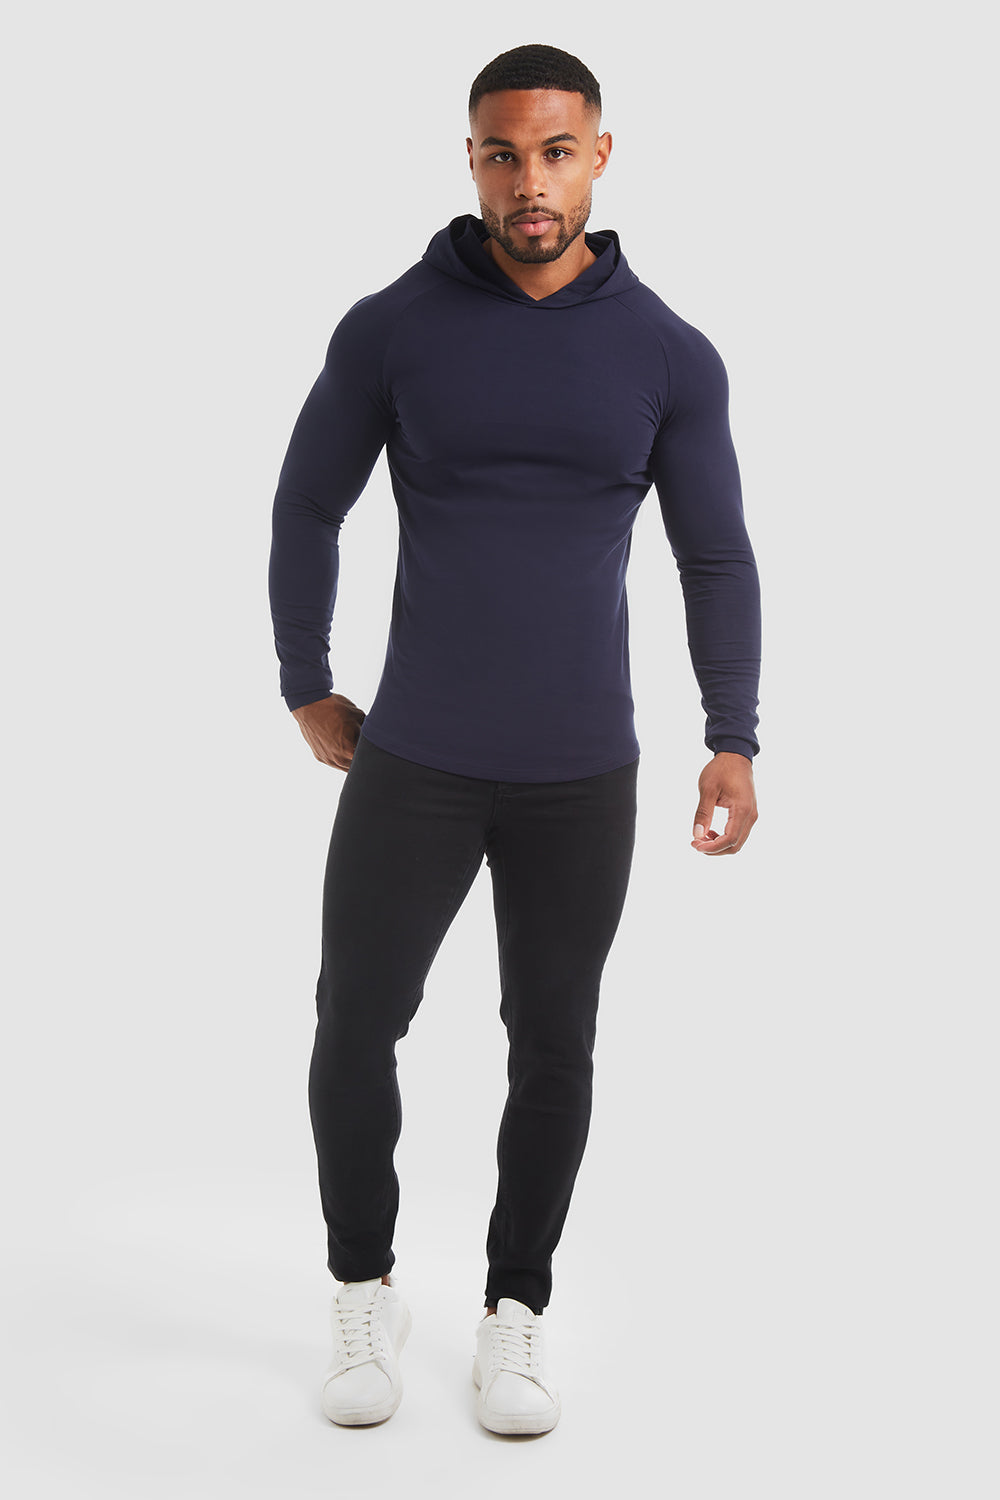 Hooded Top (LS) in True Navy - TAILORED ATHLETE - USA